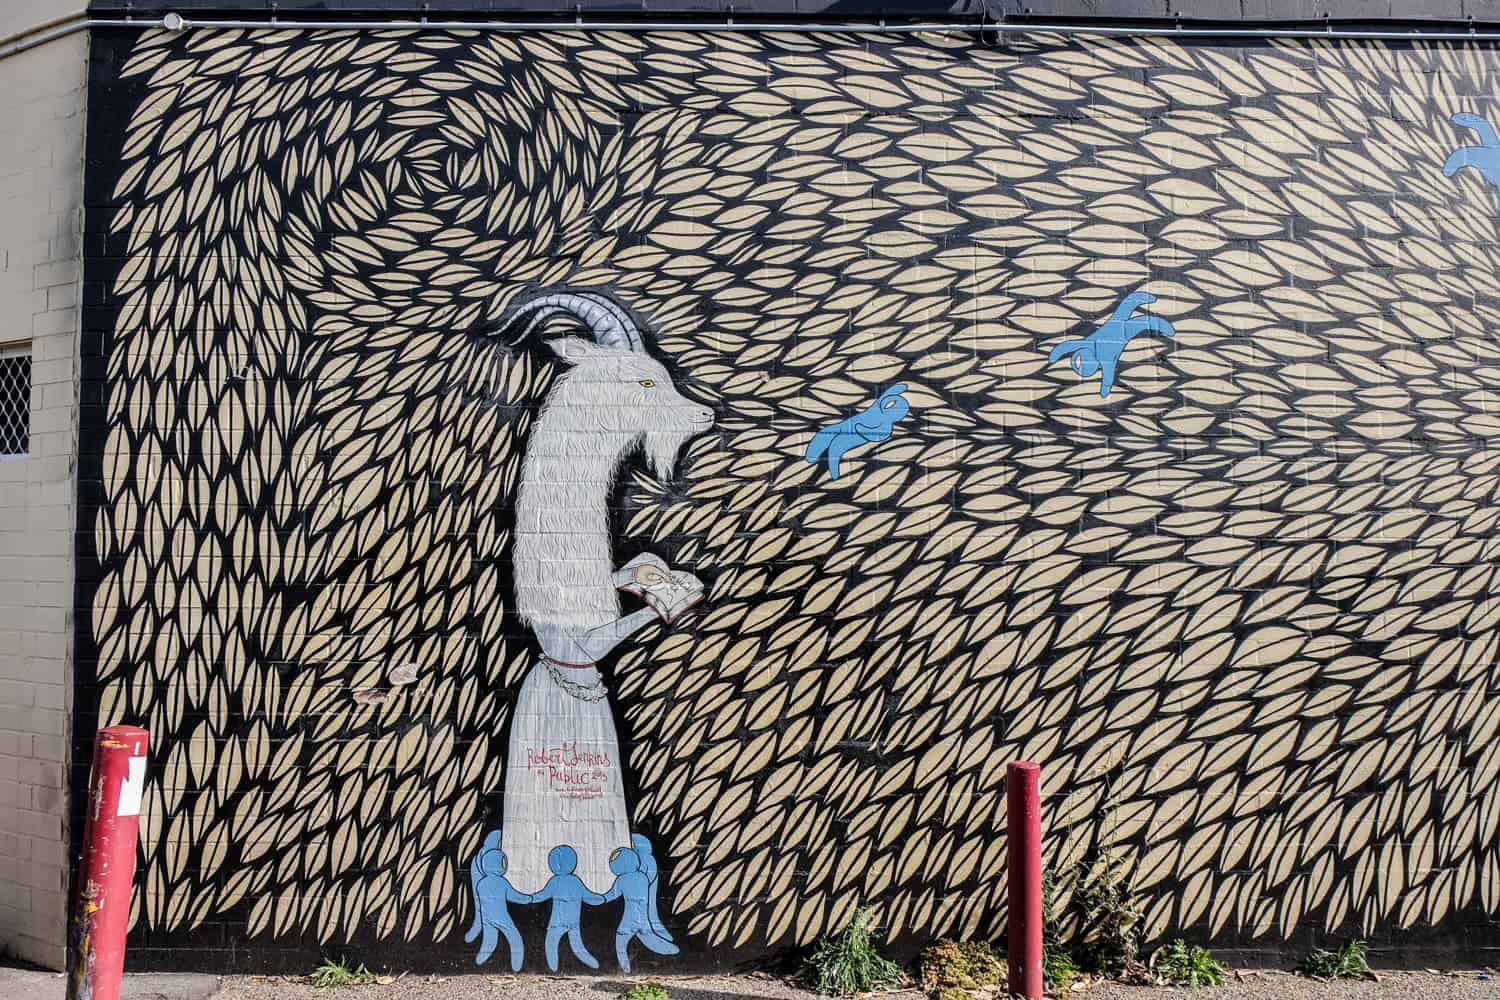 Street art of a goat with small blue human figures in Leederville, Perth